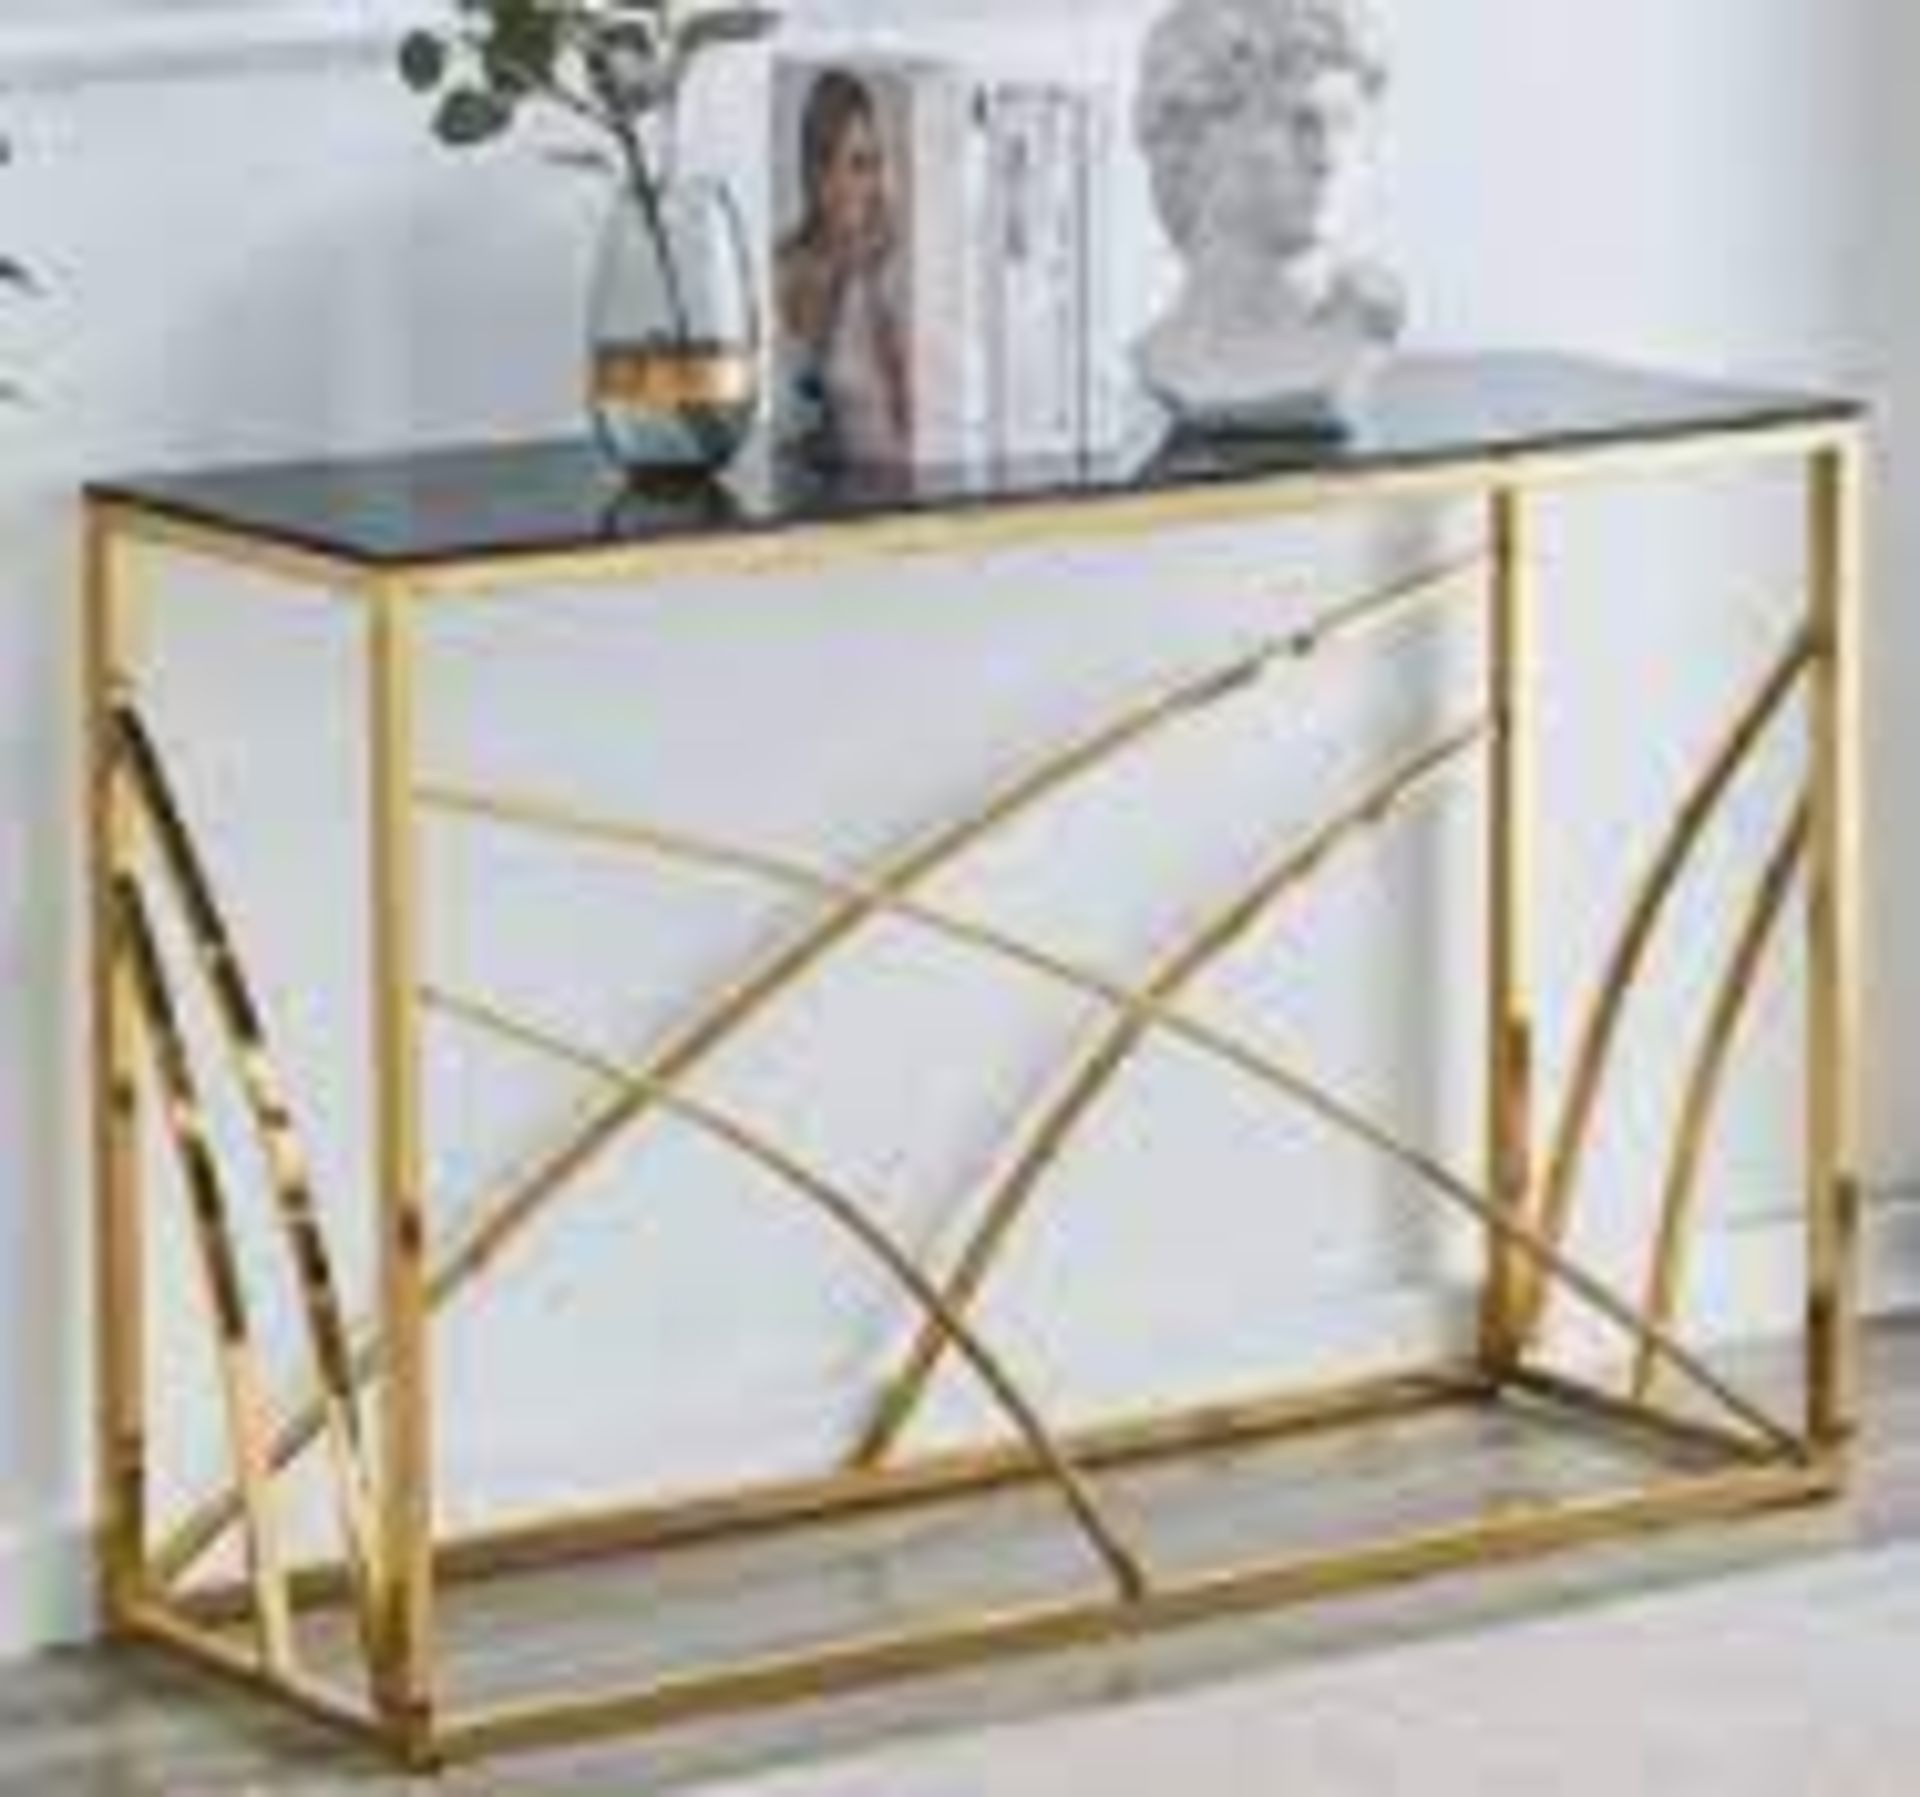 BRAND NEW STAINLESS STEEL CONSOLE TABLE WITH A GLASS TOP IN GOLD 120CM (JHAS55G) RRP £229 S1P